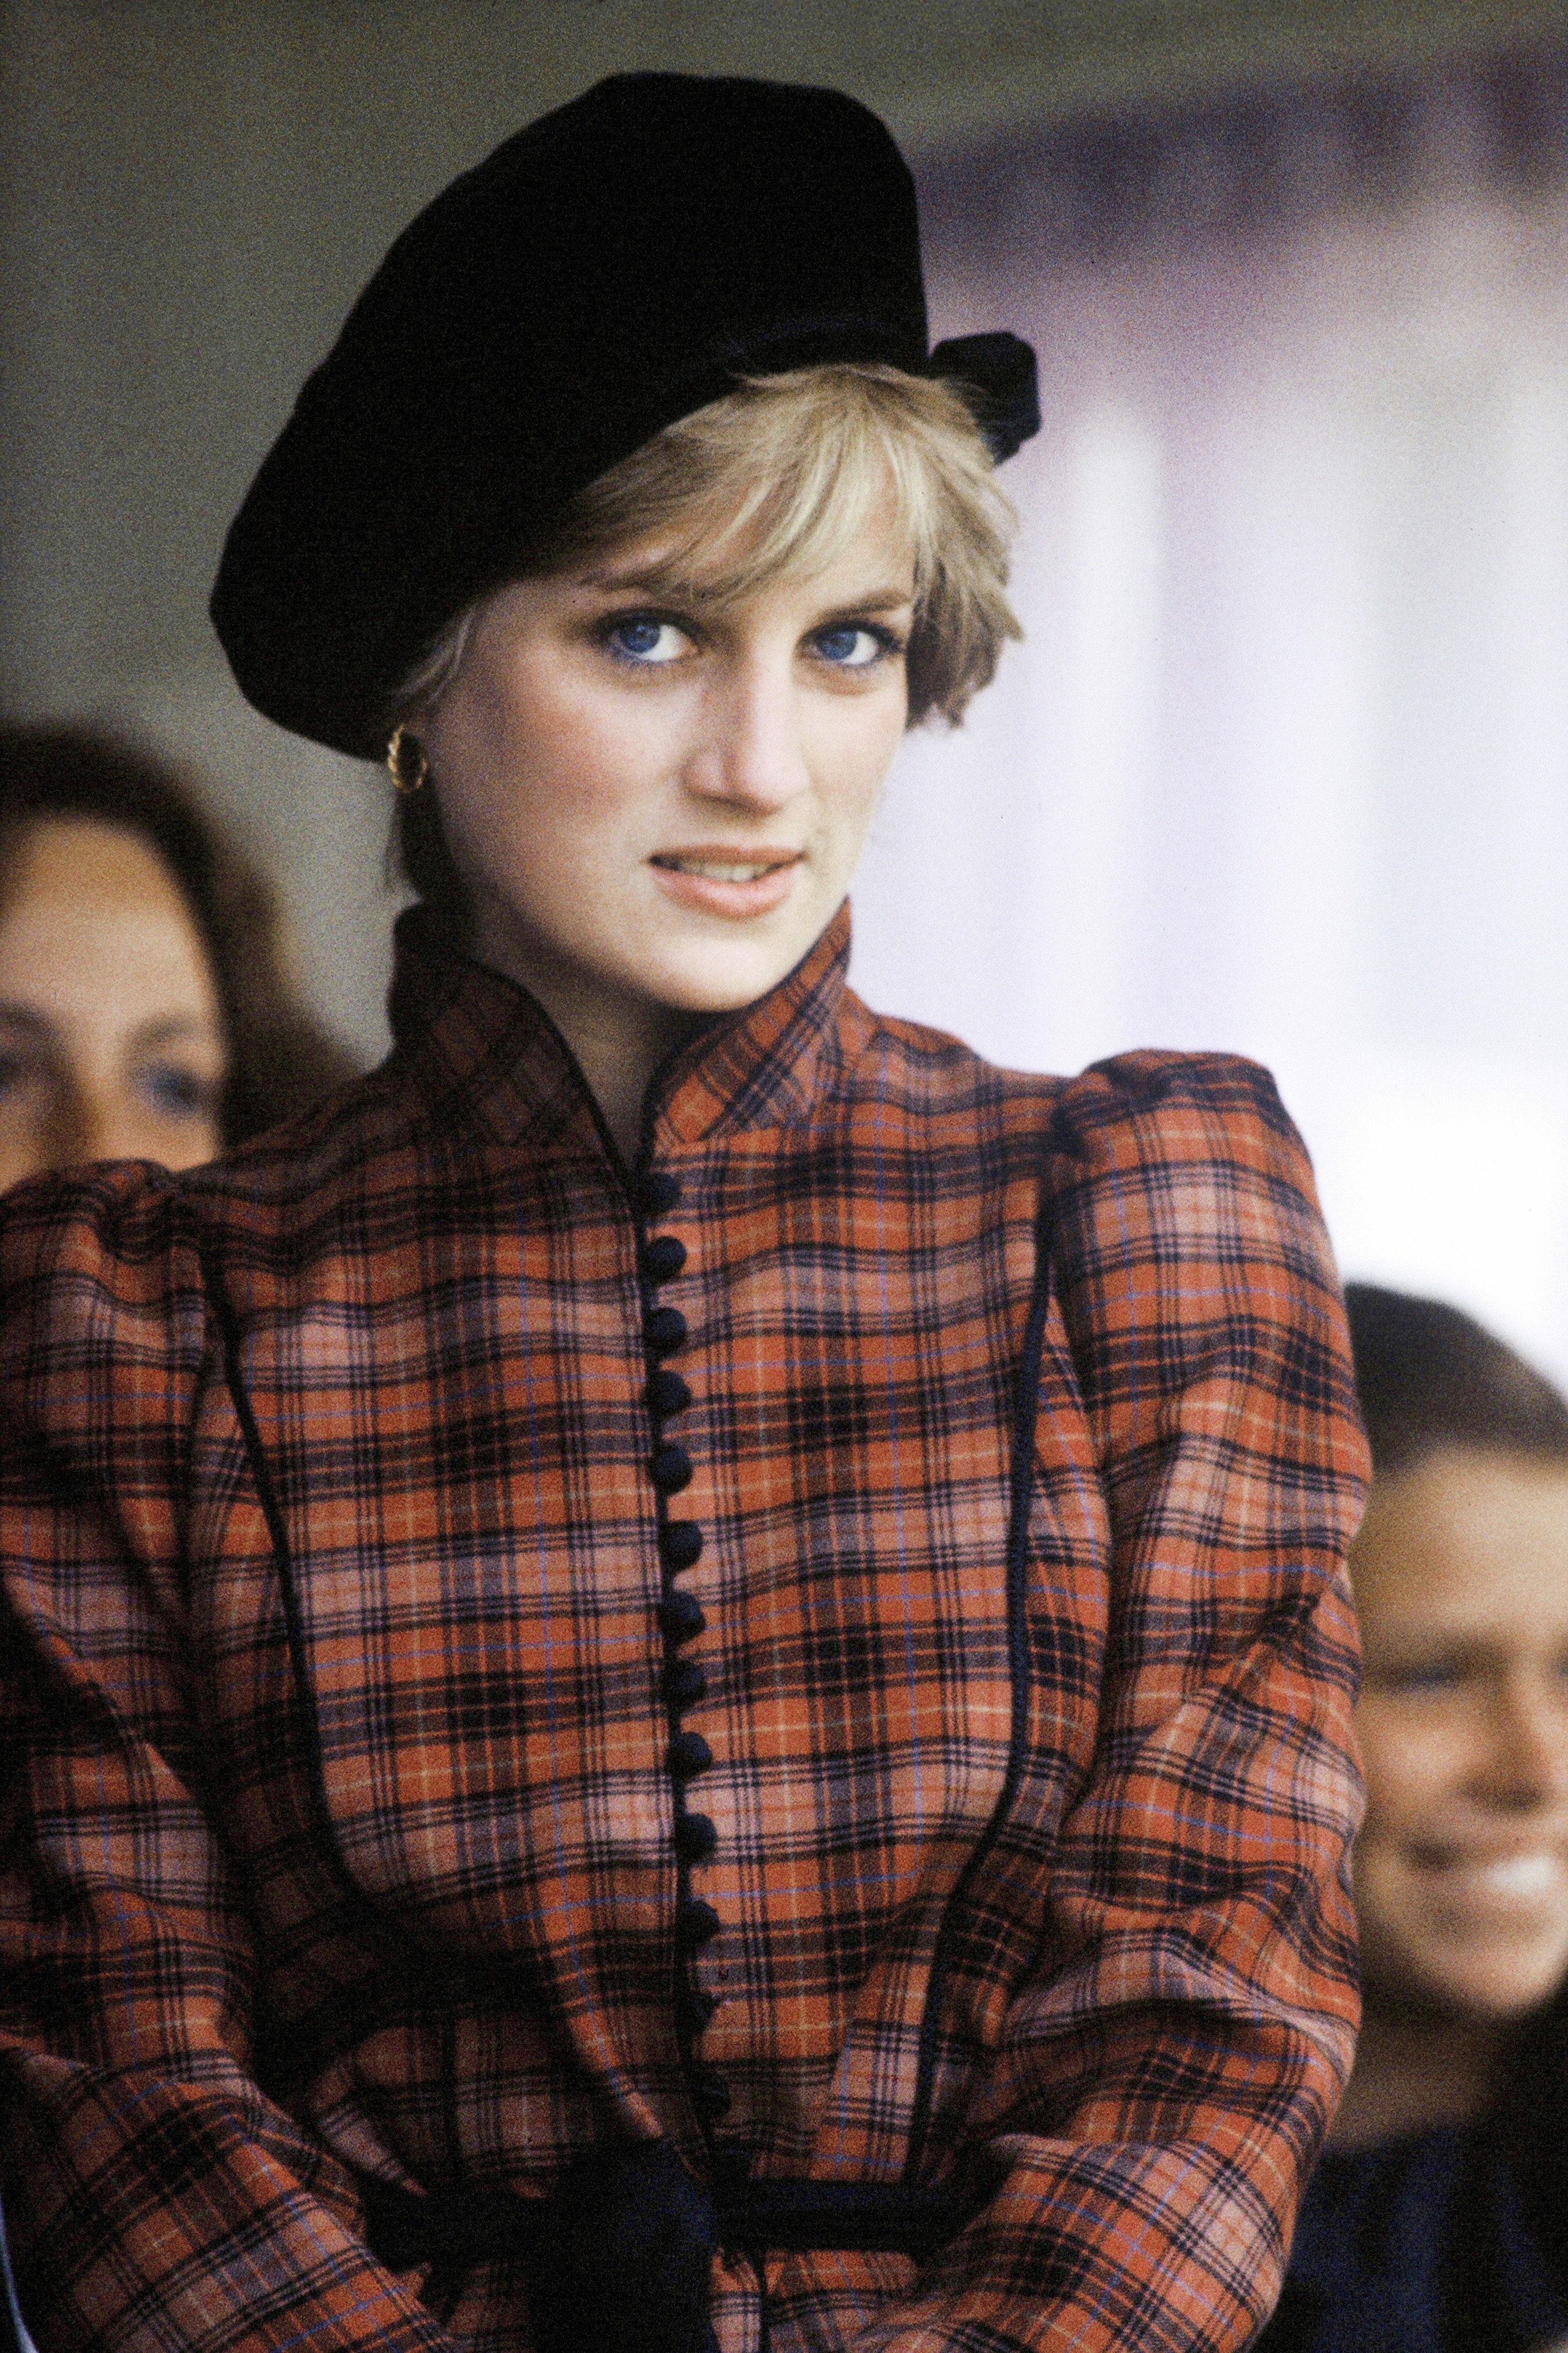 Princess Diana attends the Braemar Highland Games on September 5, 1981 in Braemar, Scotland | Source: Getty Images